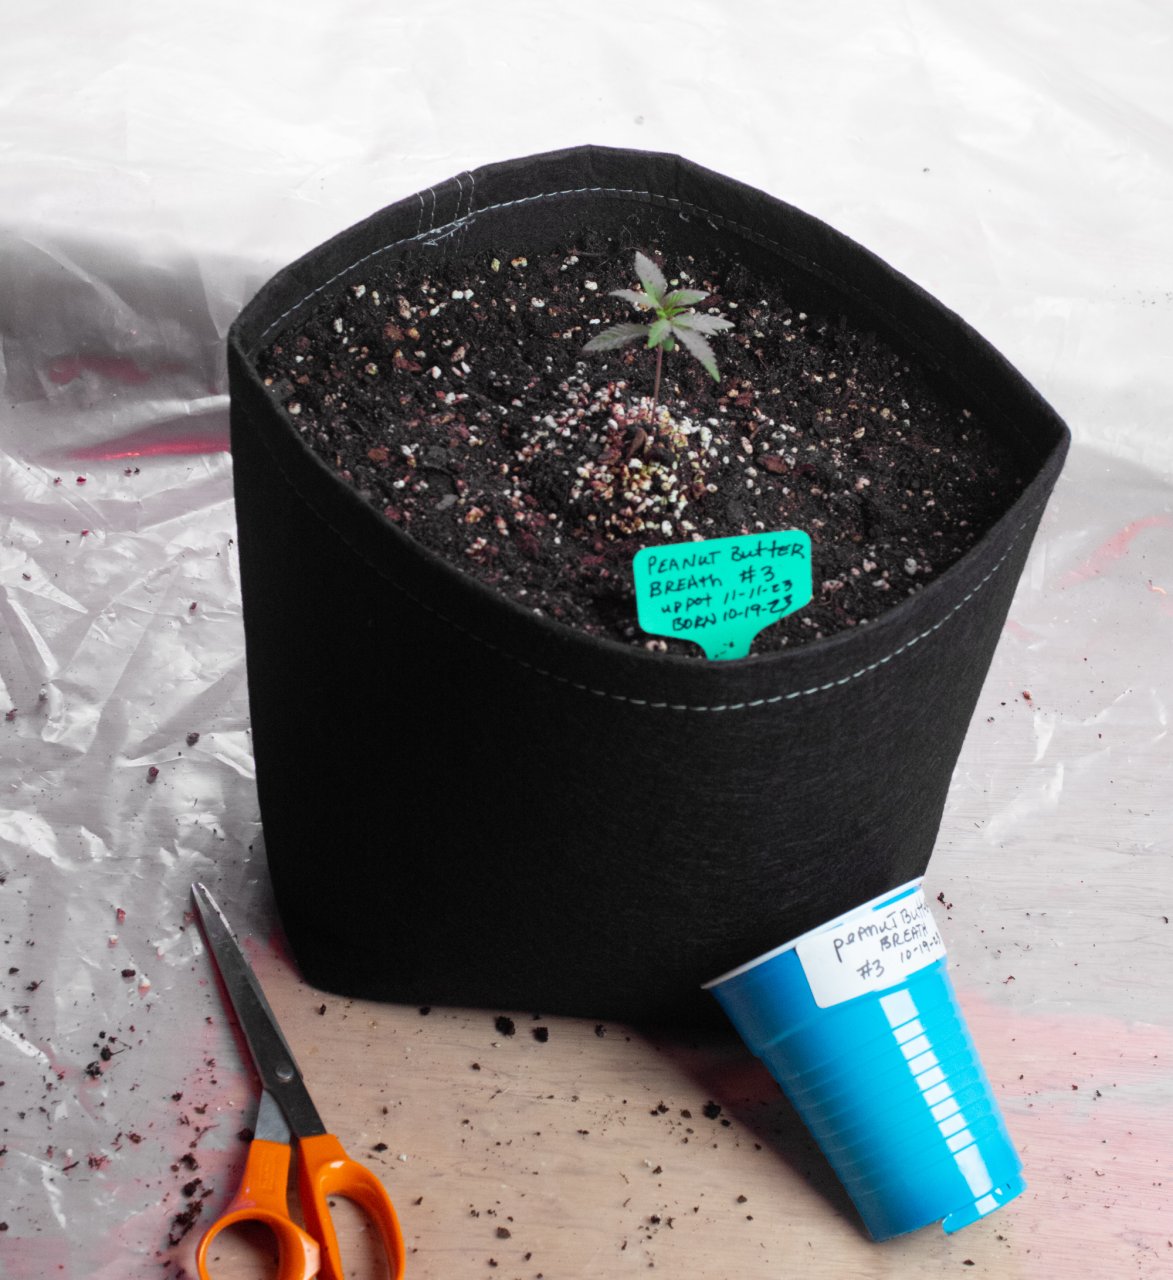 Peanut butter breath up potted-2.jpg